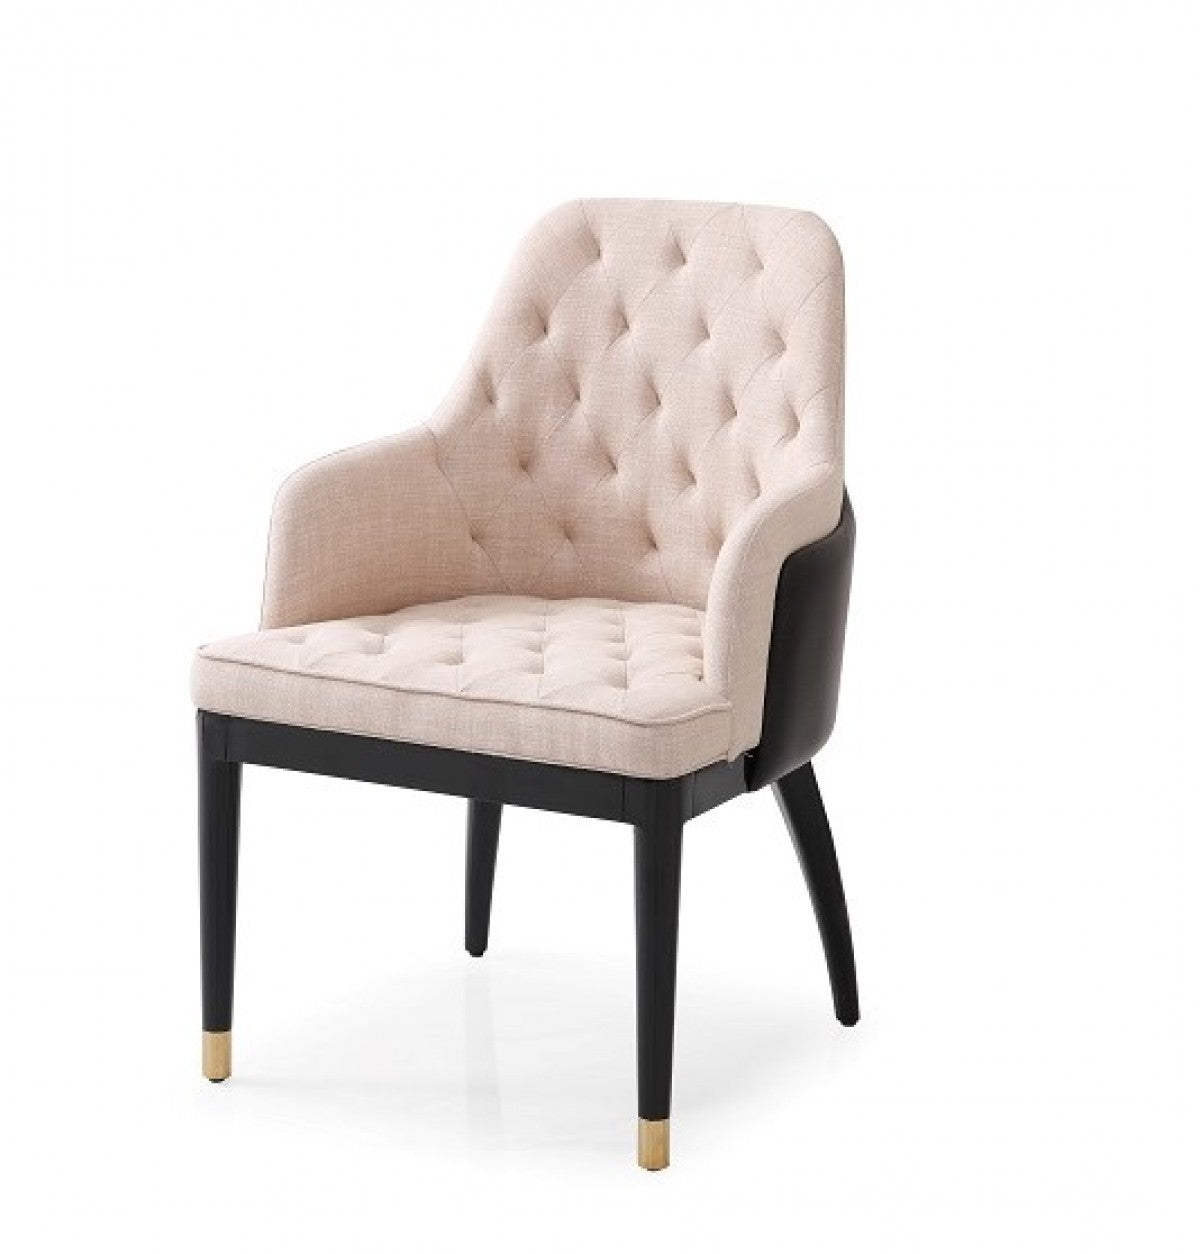 Modrest Nara - Glam Beige Fabric, Black Bonded Leather and Champagne Gold Dining Chair